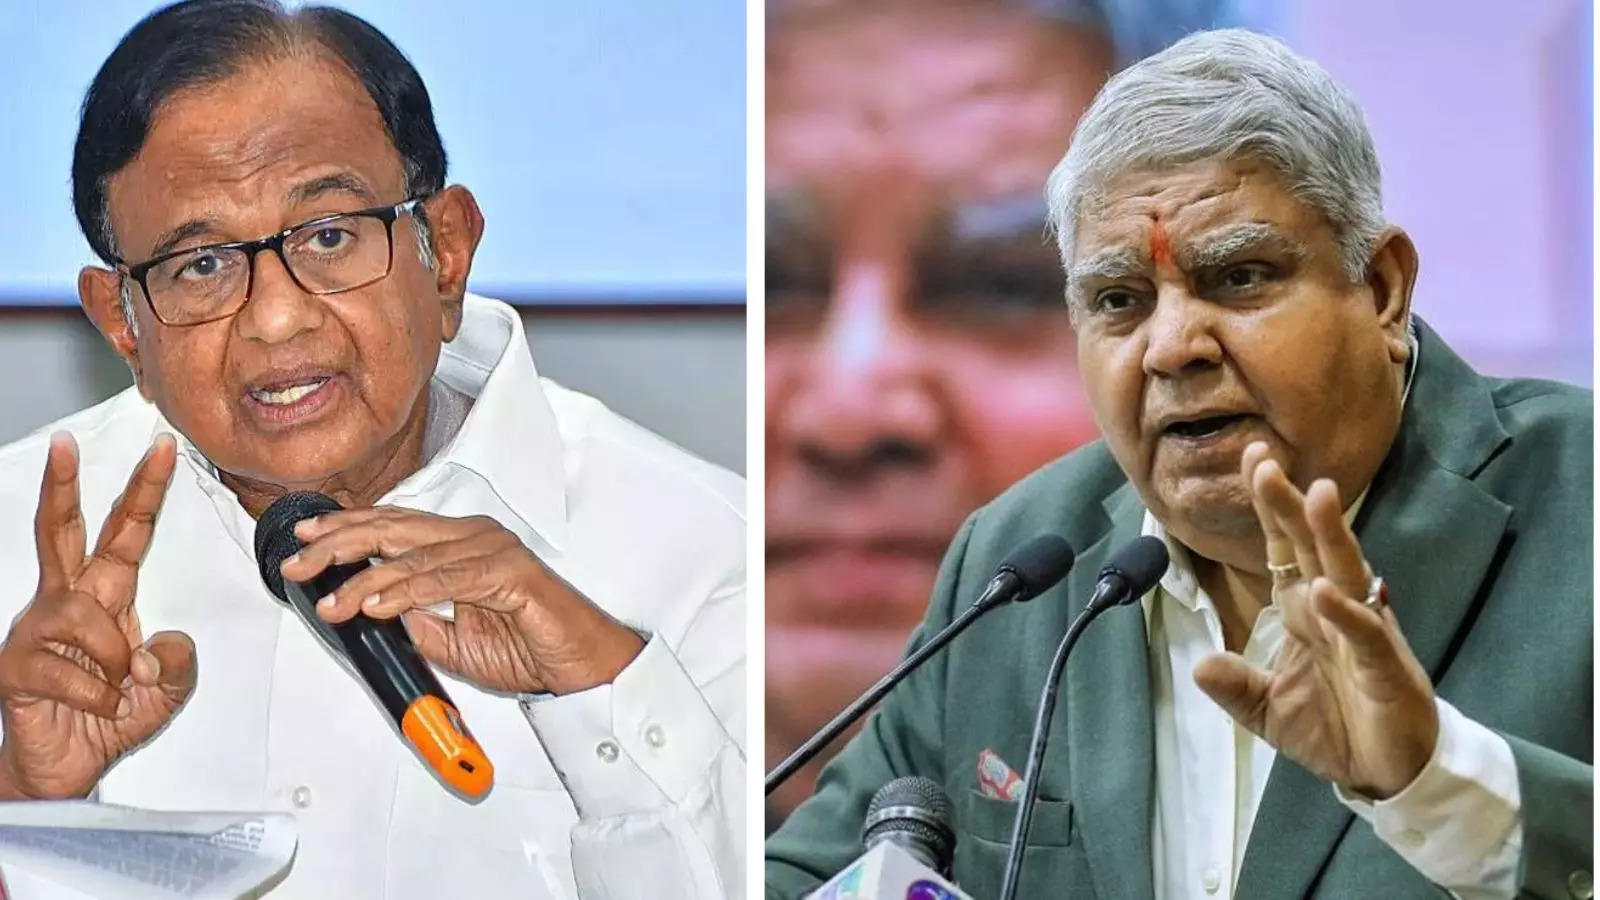 You show your concurrence by observing silence in House: Dhankhar's fresh attack on Chidambaram 